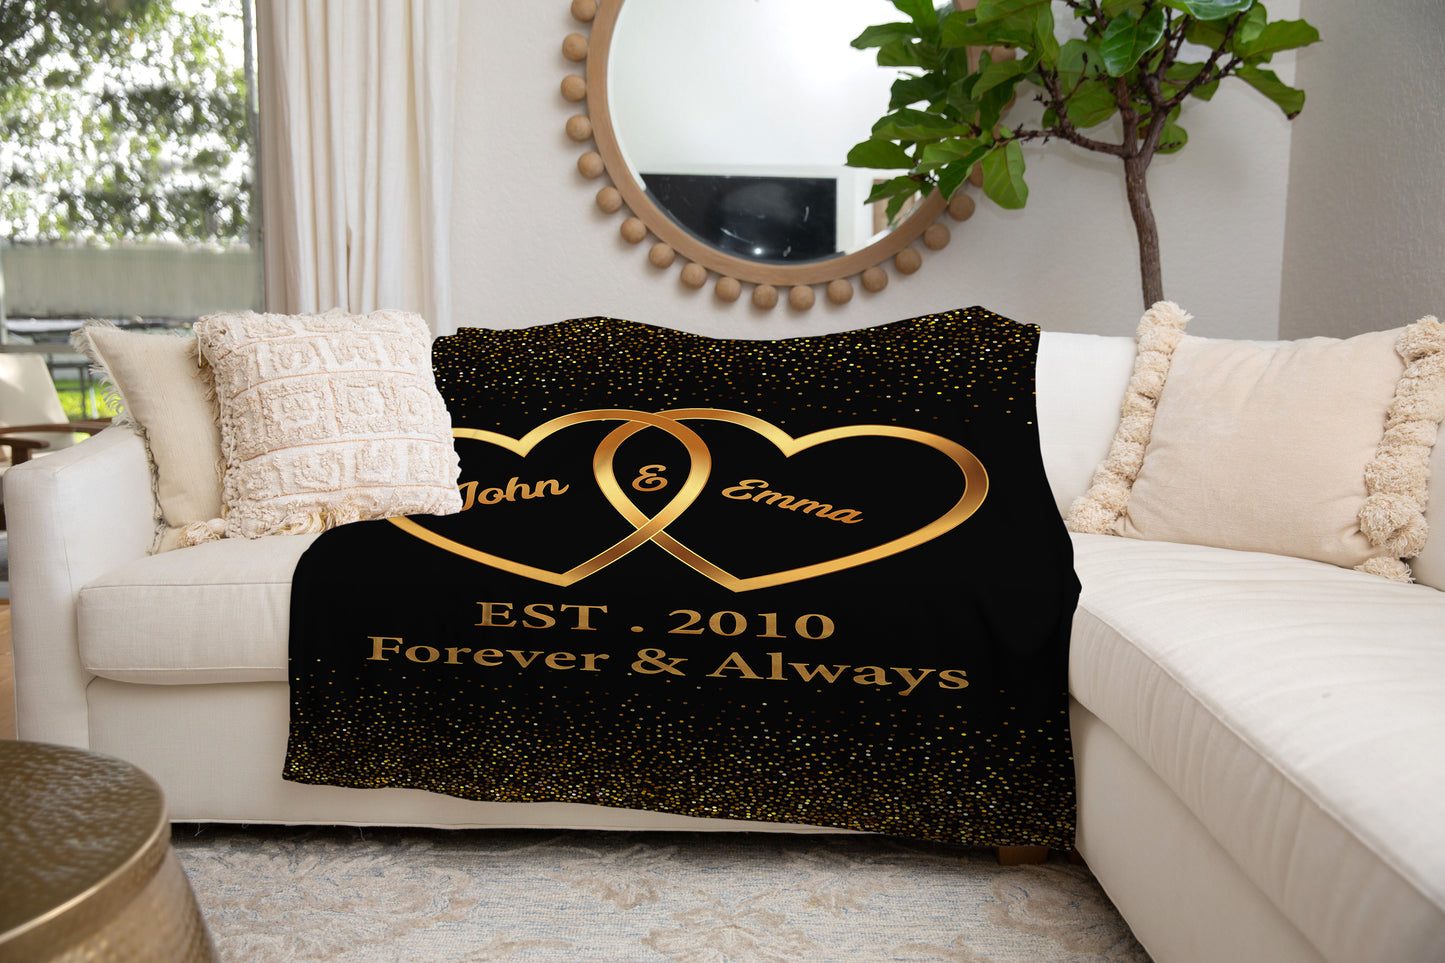 Personalized Bliss: Velveteen Plush Blanket for Couples - Elevate Your Cozy Moments Together!